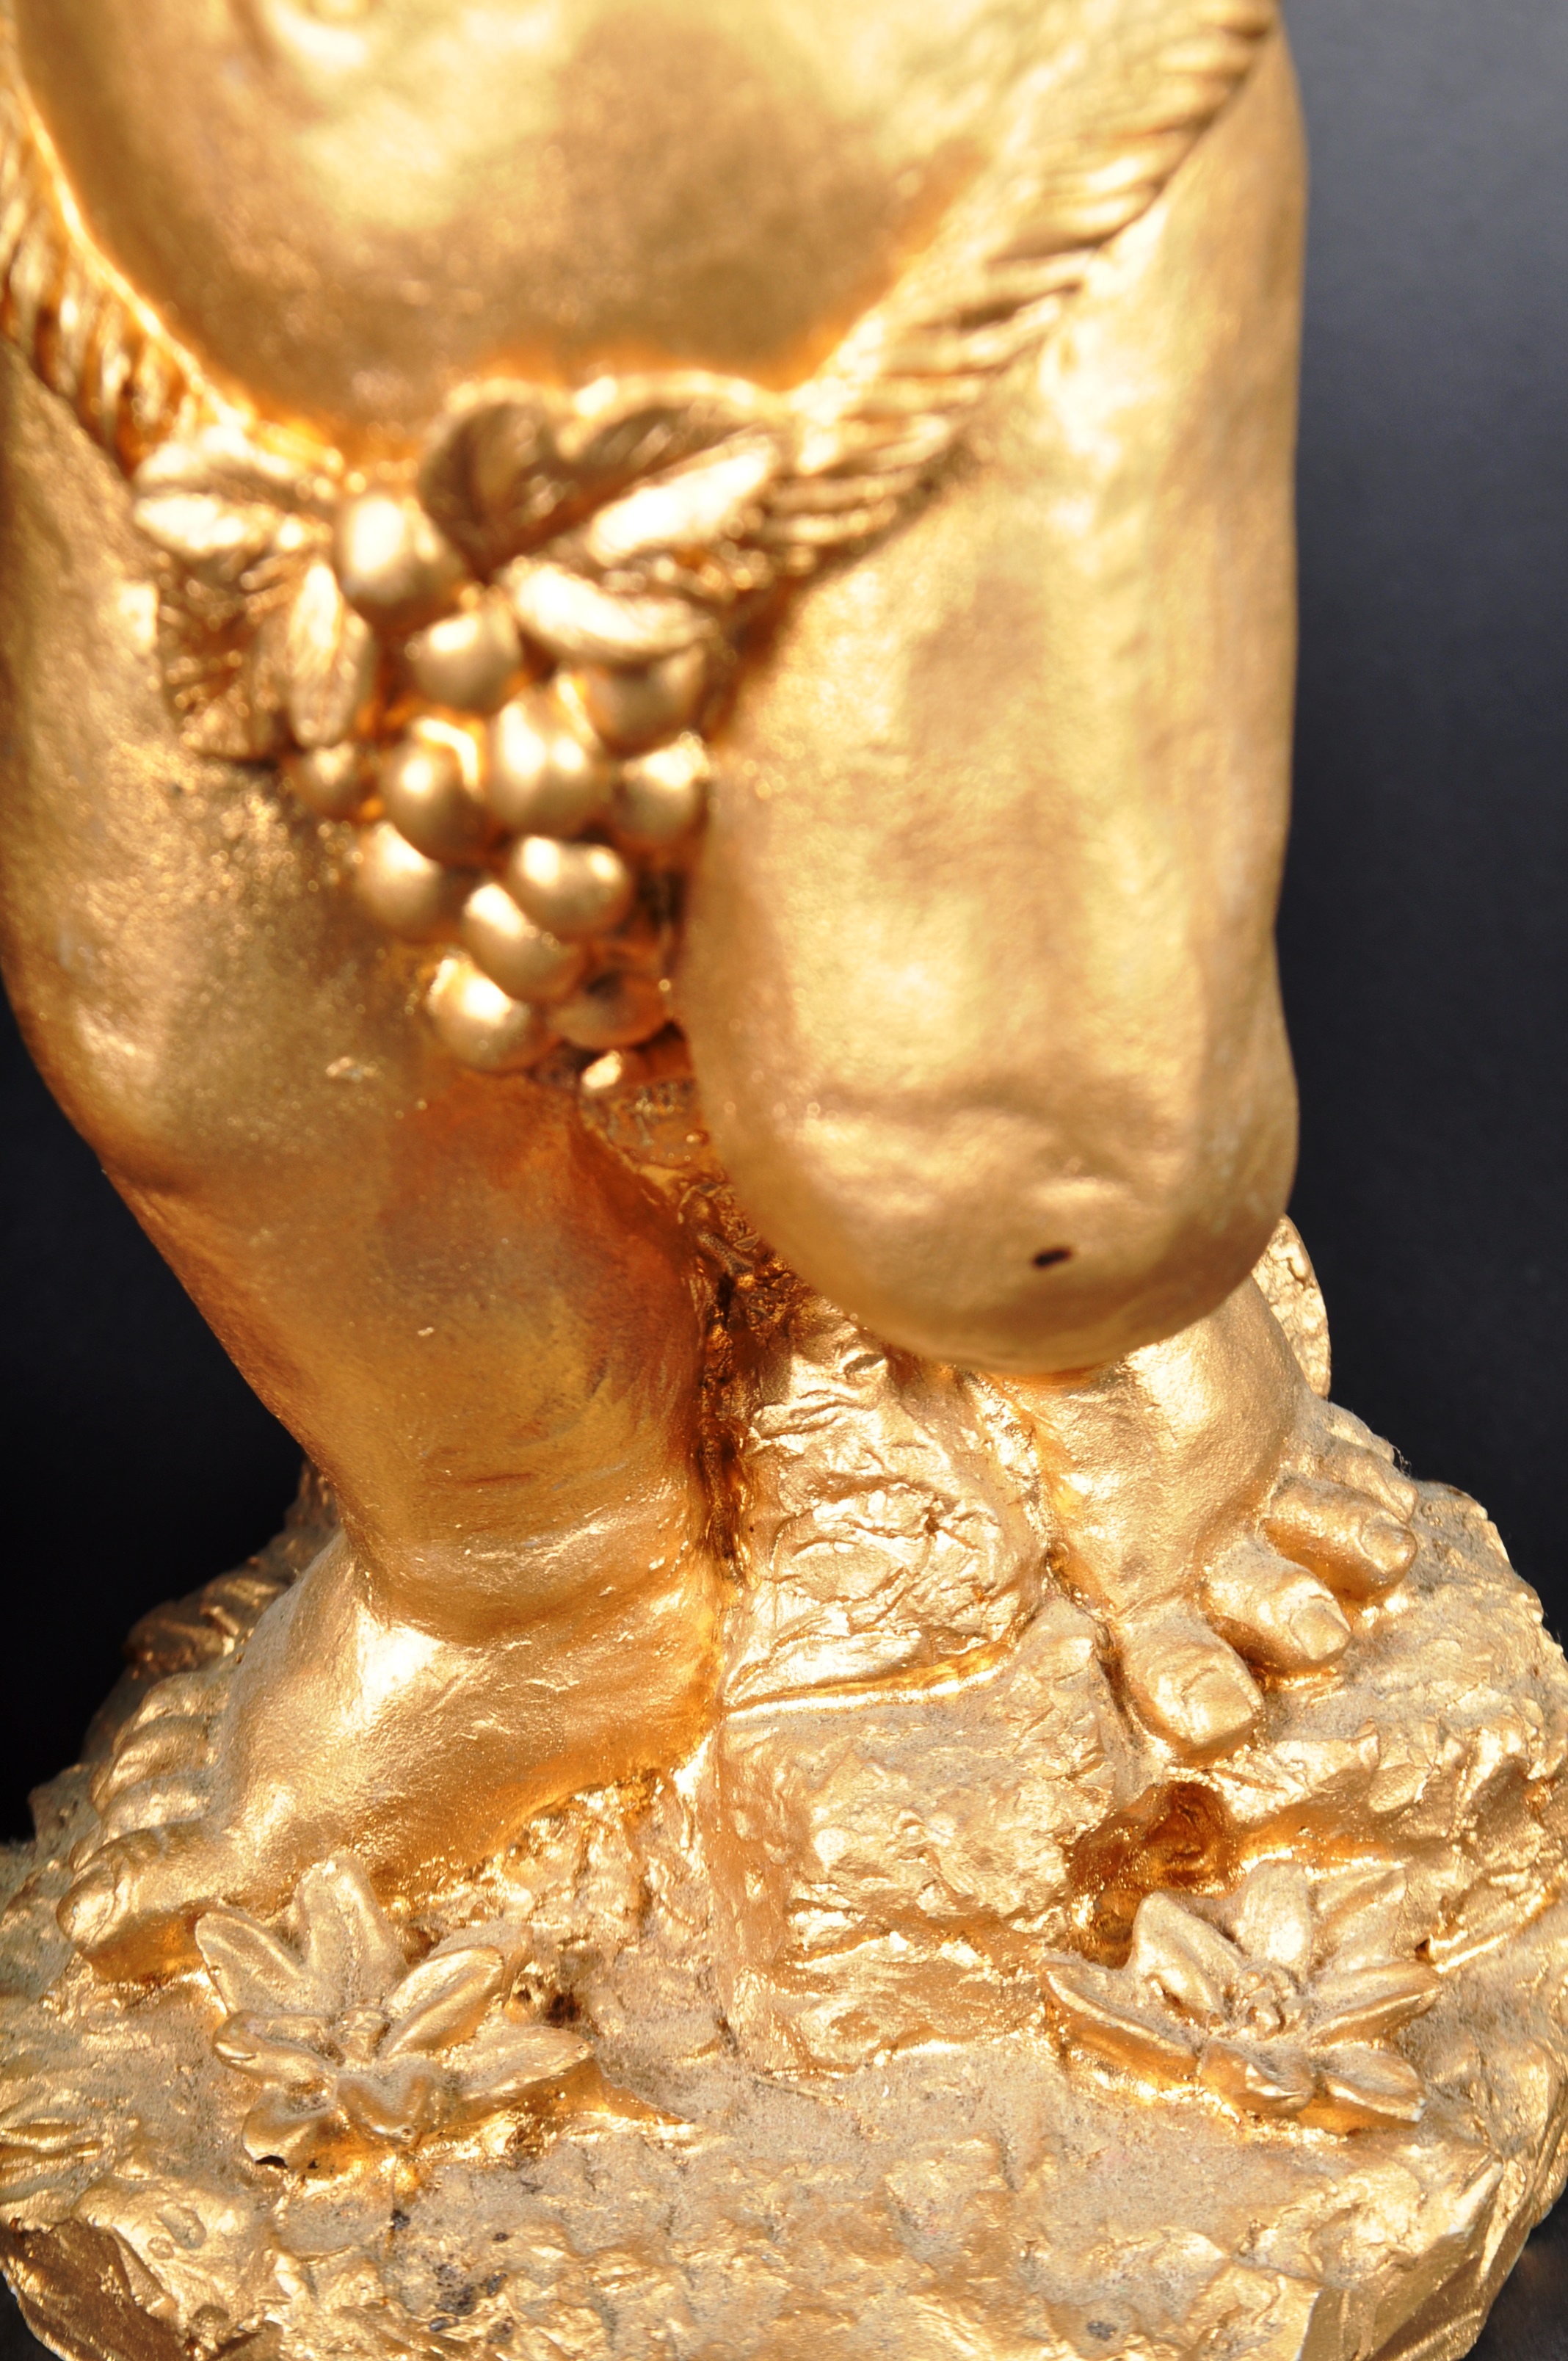 PAIR OF CONTEMPORARY GILT RESIN FIGURES MOULDED AS CHERUBS - Image 8 of 10